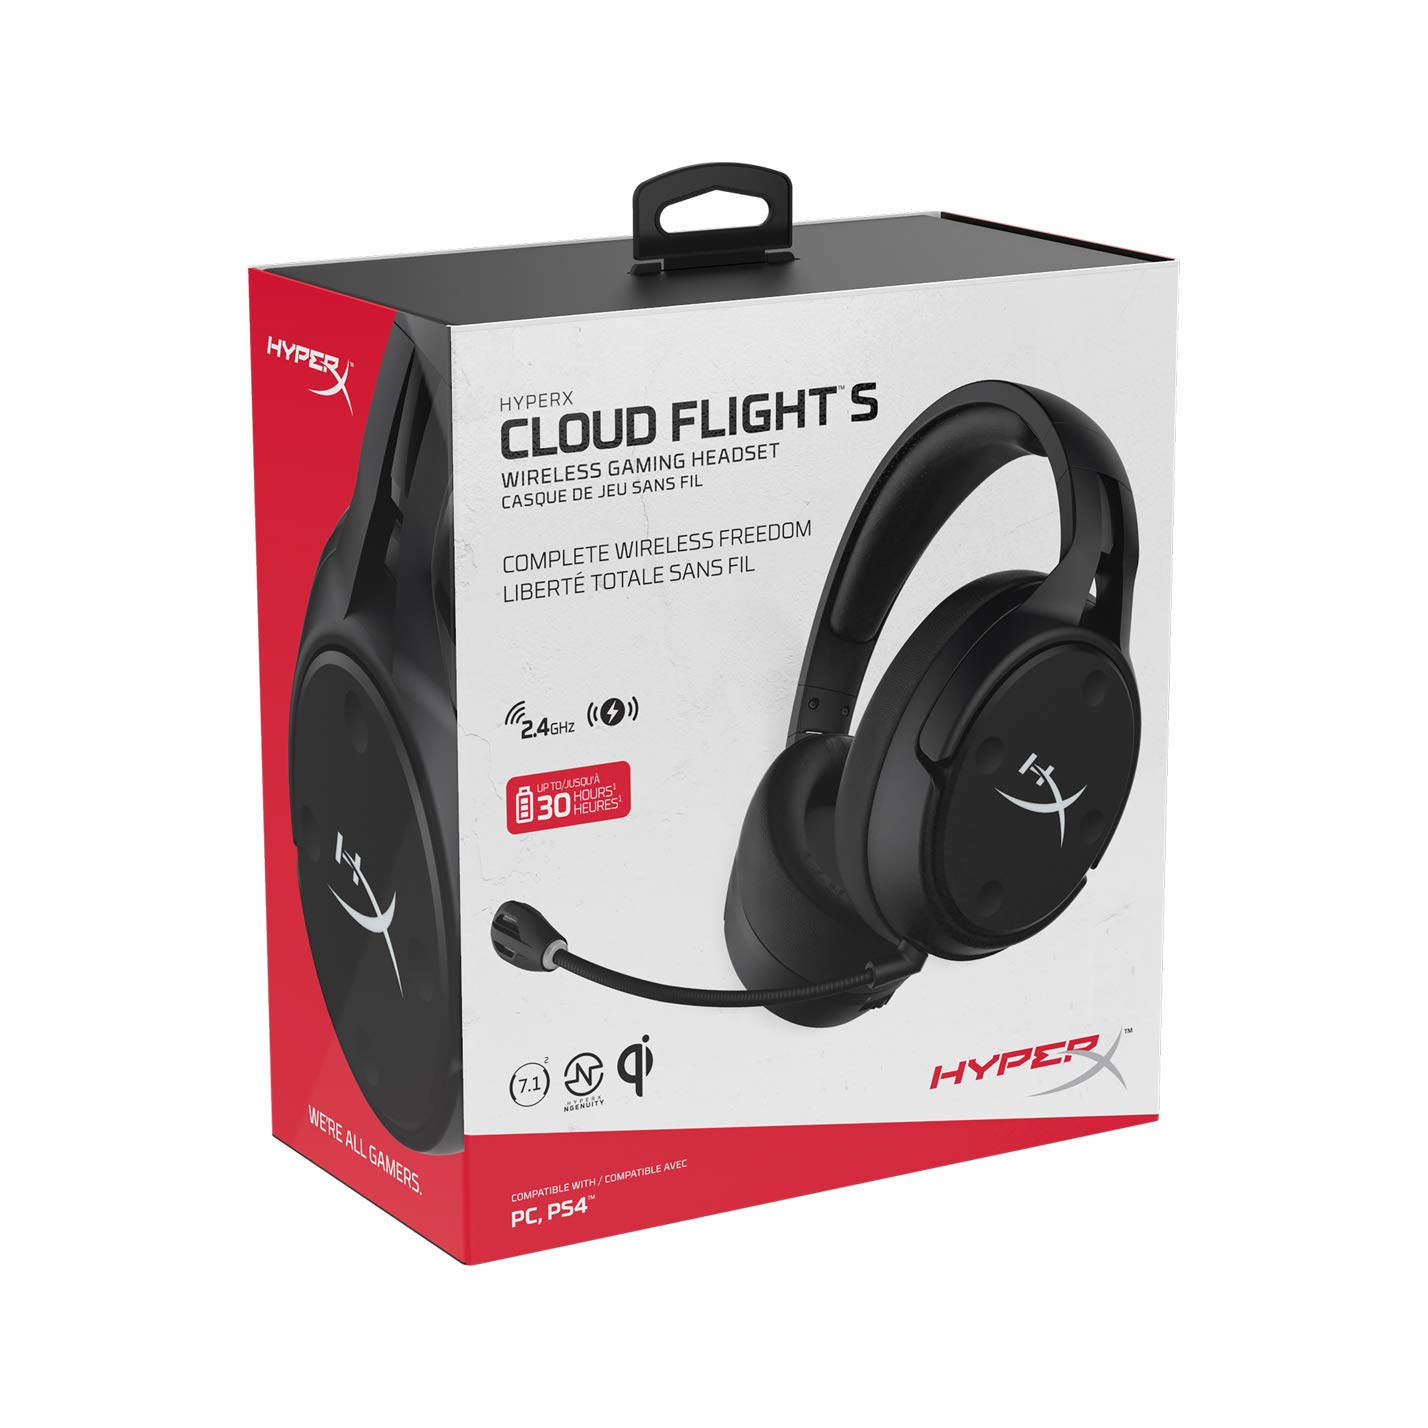 HyperX Cloud Flight S - Wireless Gaming Headset, 7.1 Surround Sound, 30 Hour Battery Life, Qi Wireless Charging, Detachable Microphone with LED Mute Indicator, Compatible with PC & PS4